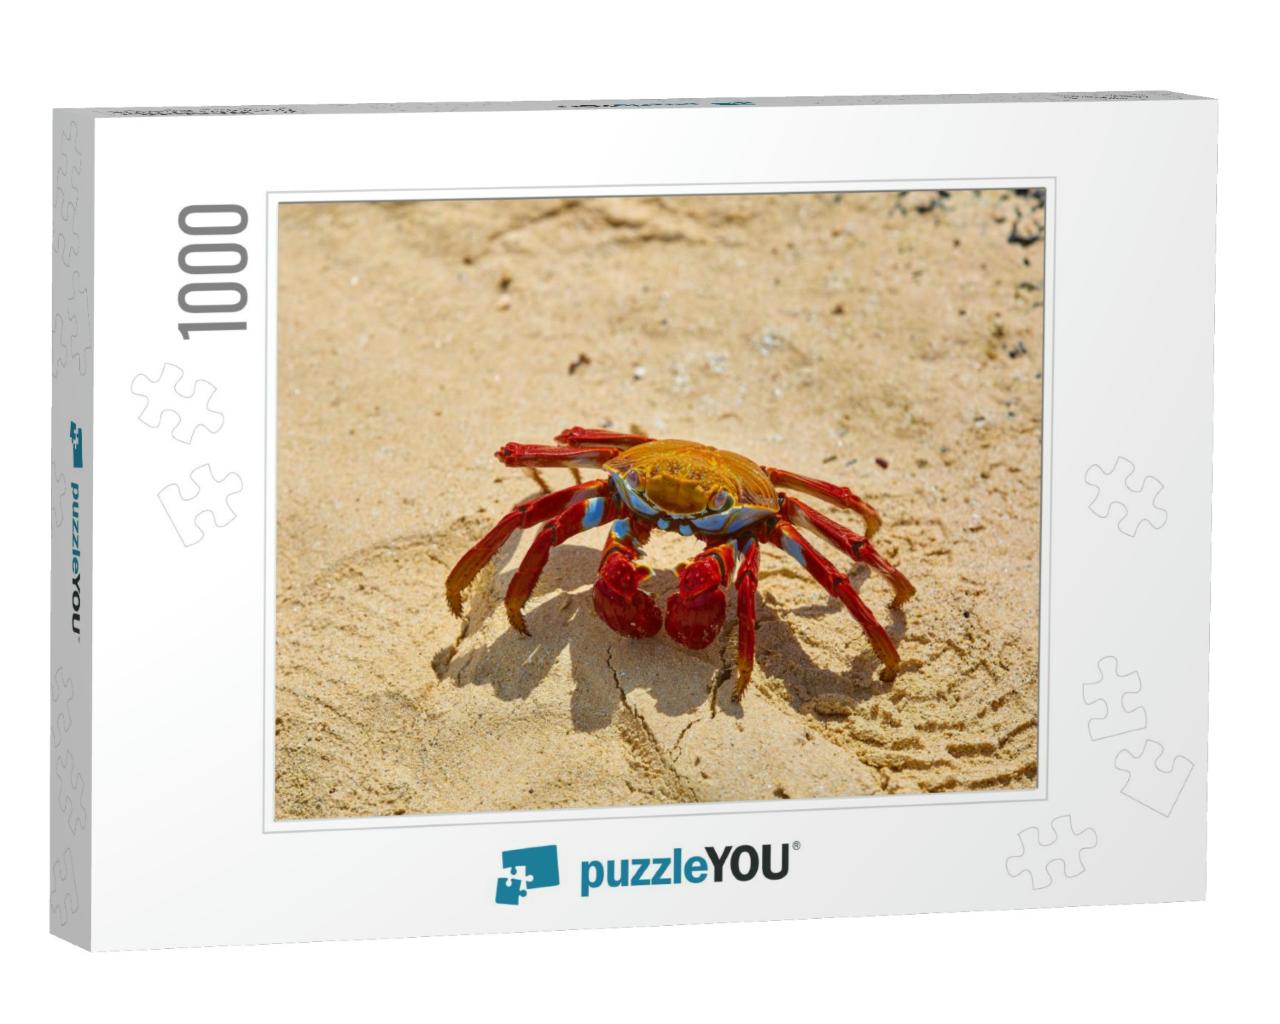 Sally Lightfoot Crab Grapsus Grapsus on Yellow Sand, Gala... Jigsaw Puzzle with 1000 pieces